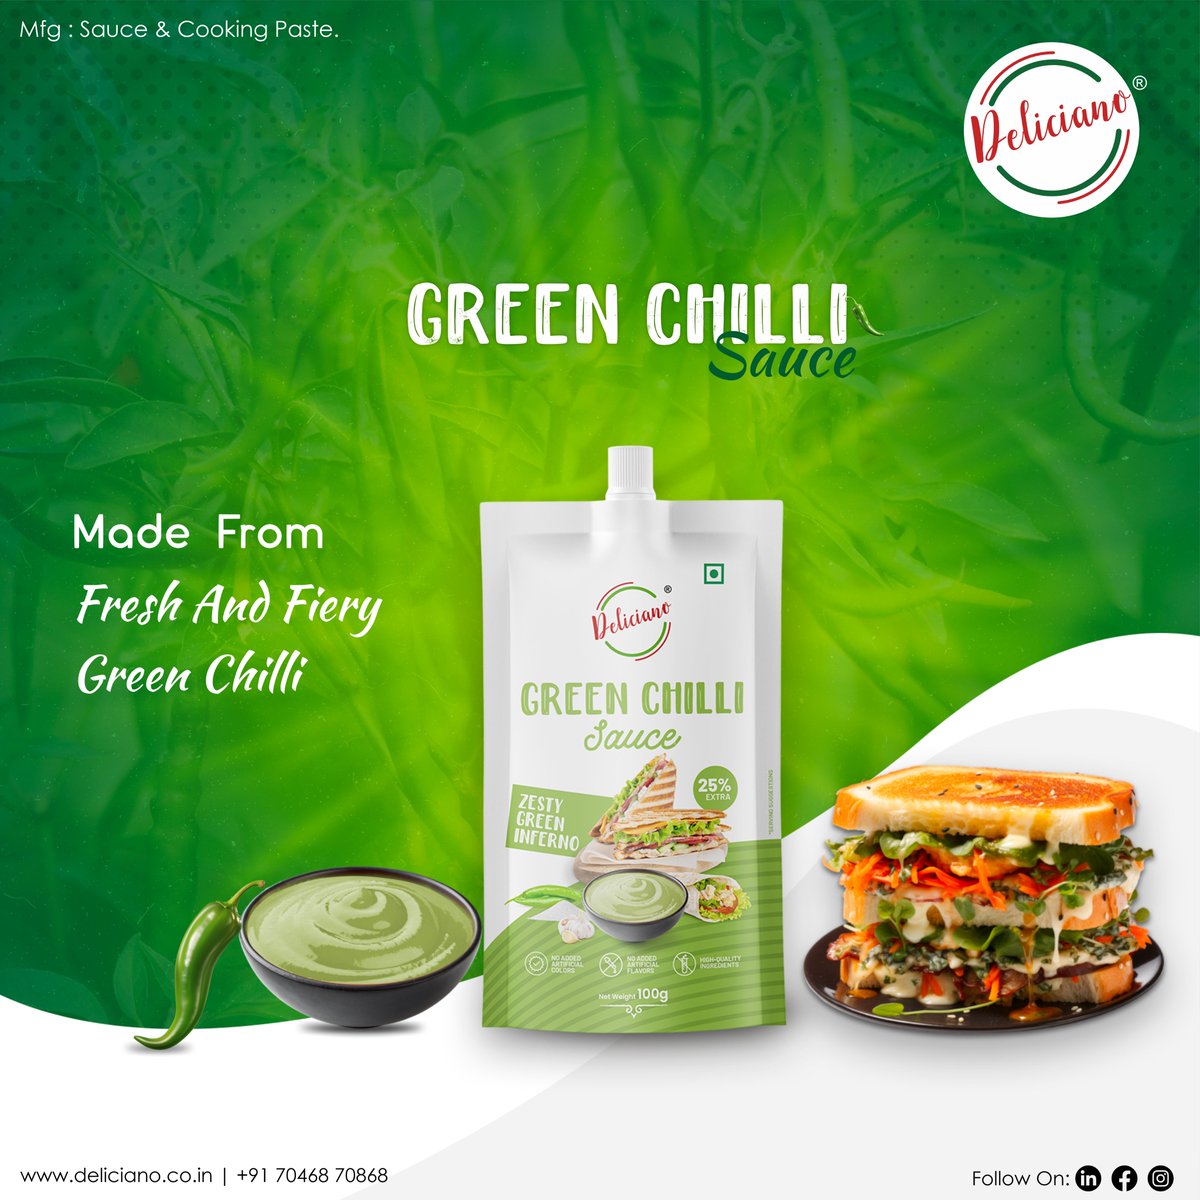 Made From Fresh and Fiery Green Chili

Green Chilli Sauce

#deliciano #greenchilli #chillisauce #farmfresh #fresh #locallysourced #supportlocal #delicious #cooking  #sauce #food #hotel #indianfood #rajkot #foodies #fmcg #india #makeinindia #madeinindia

deliciano.co.in